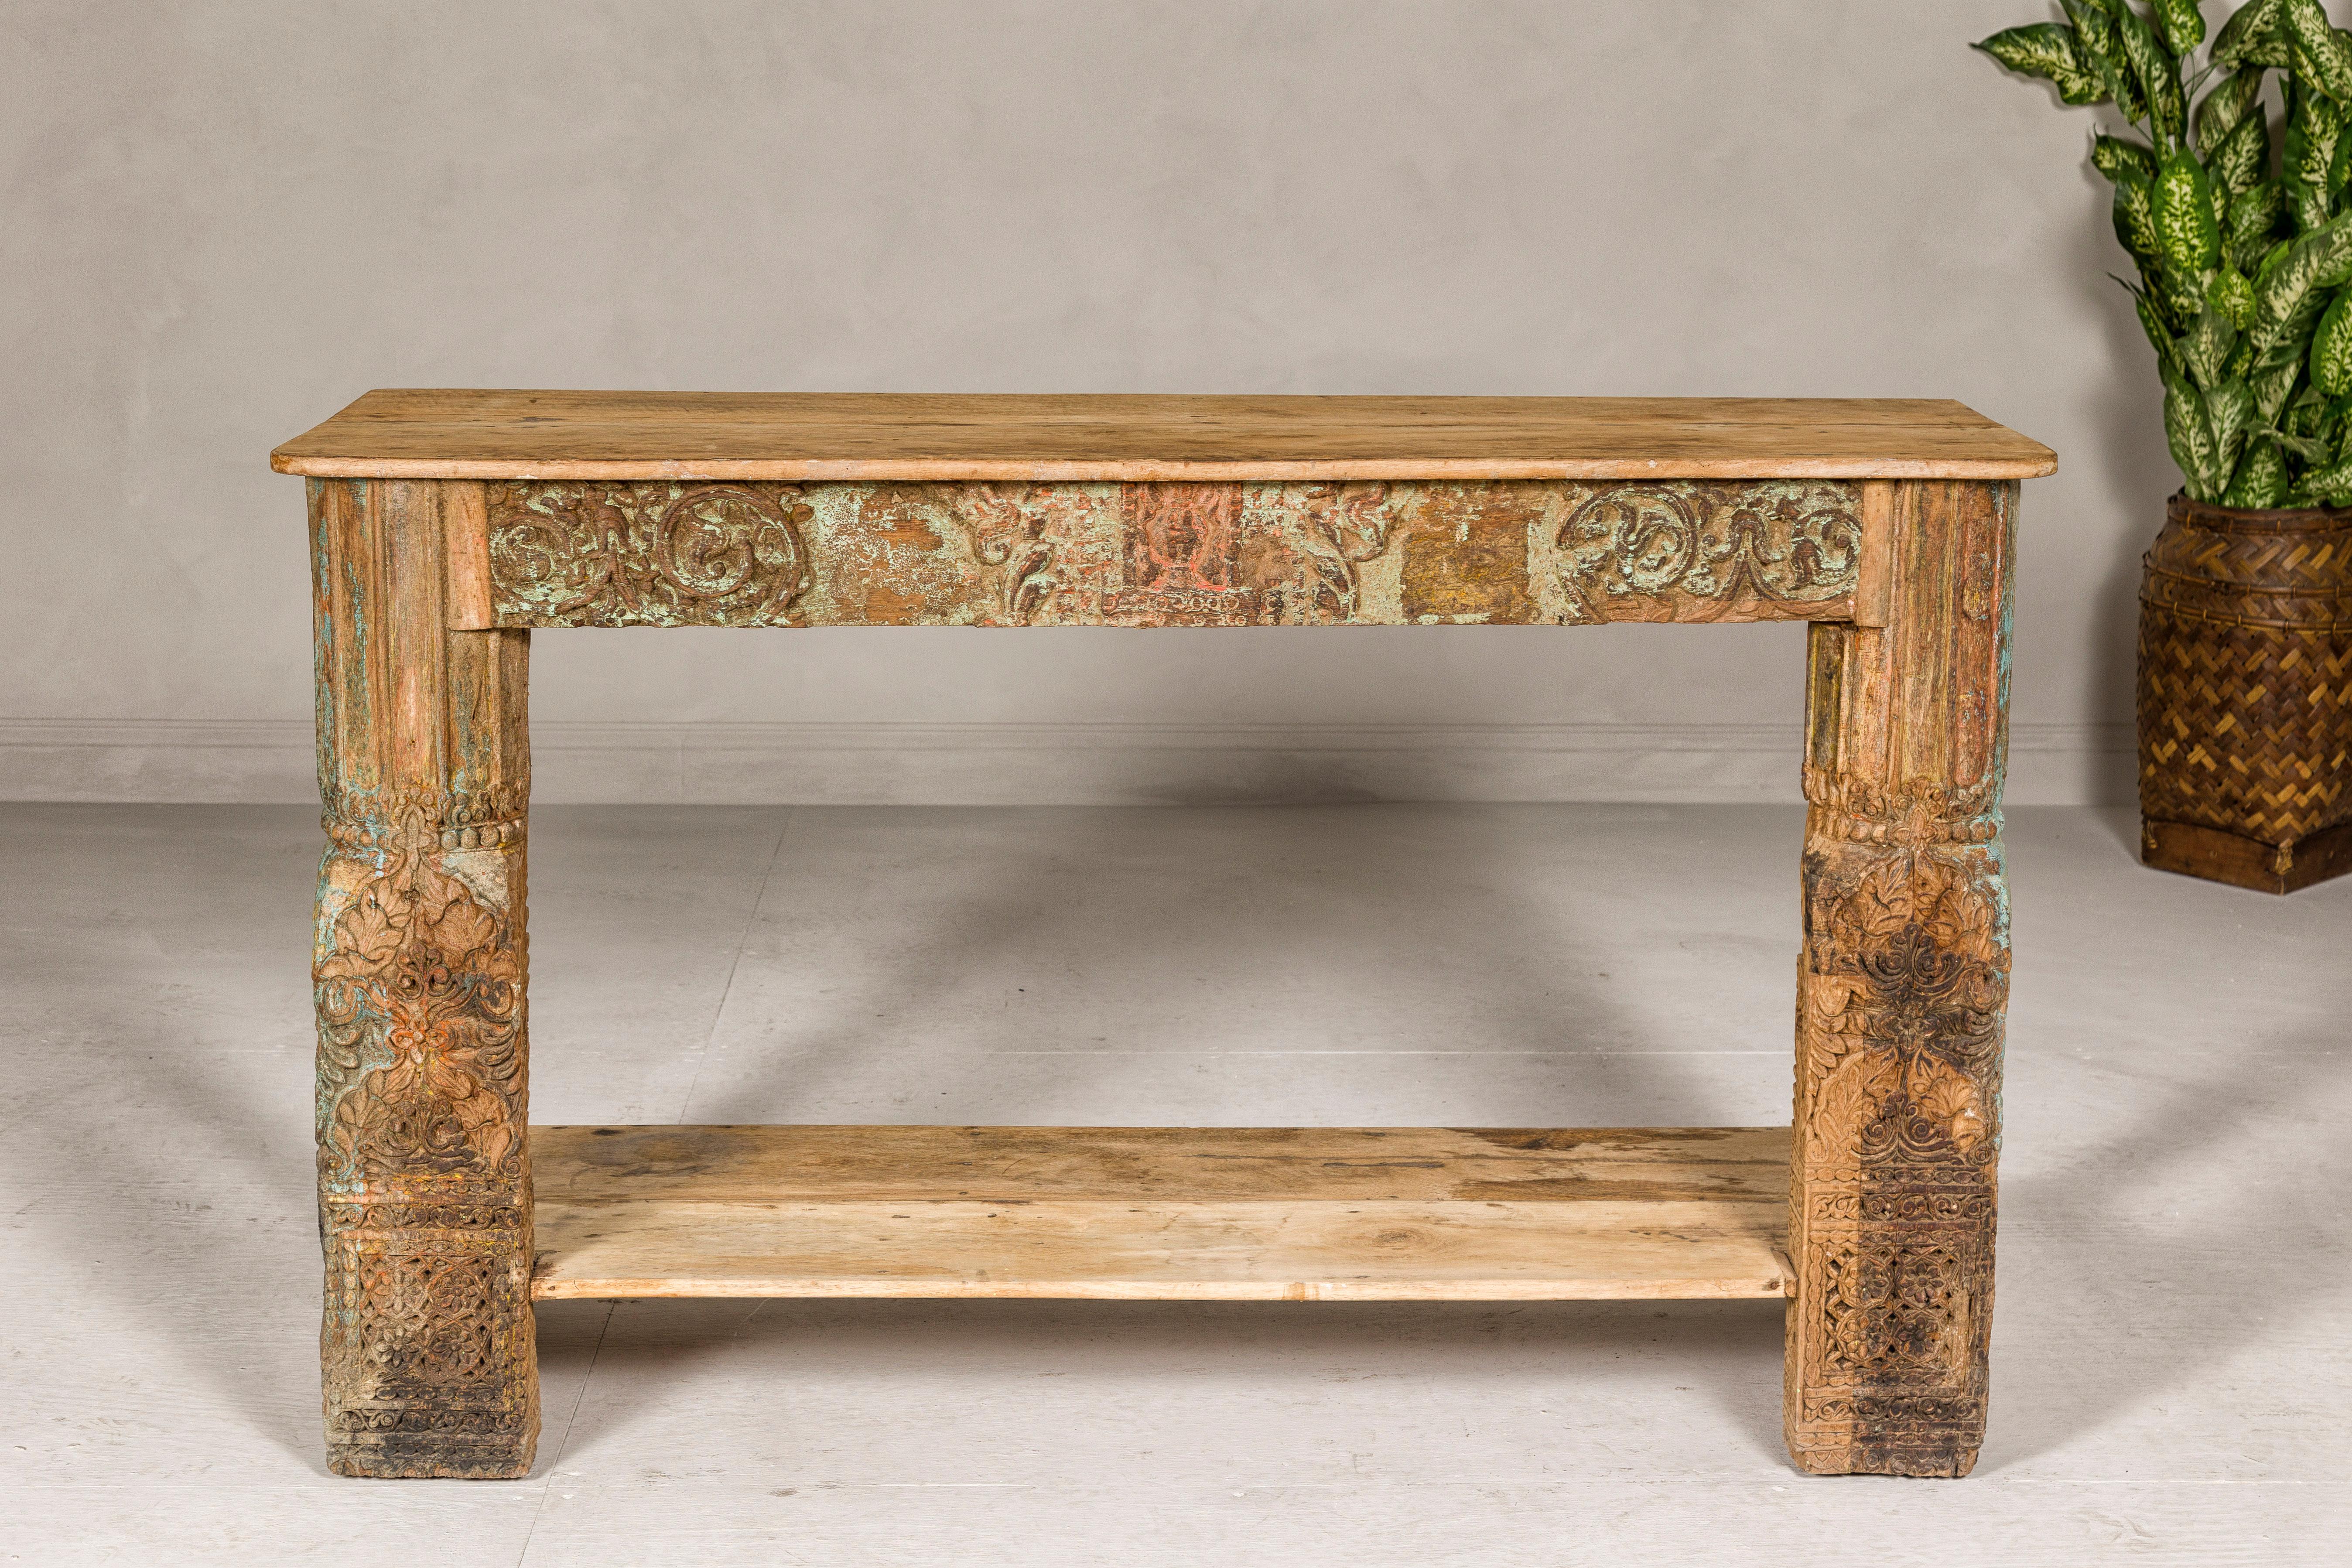 A Mughal style polychrome console table with scrollwork carved apron, foliage décor, bottom shelf and distressed appearance. Experience the splendor of Mughal artistry with this contemporary polychrome console table, a piece that beautifully